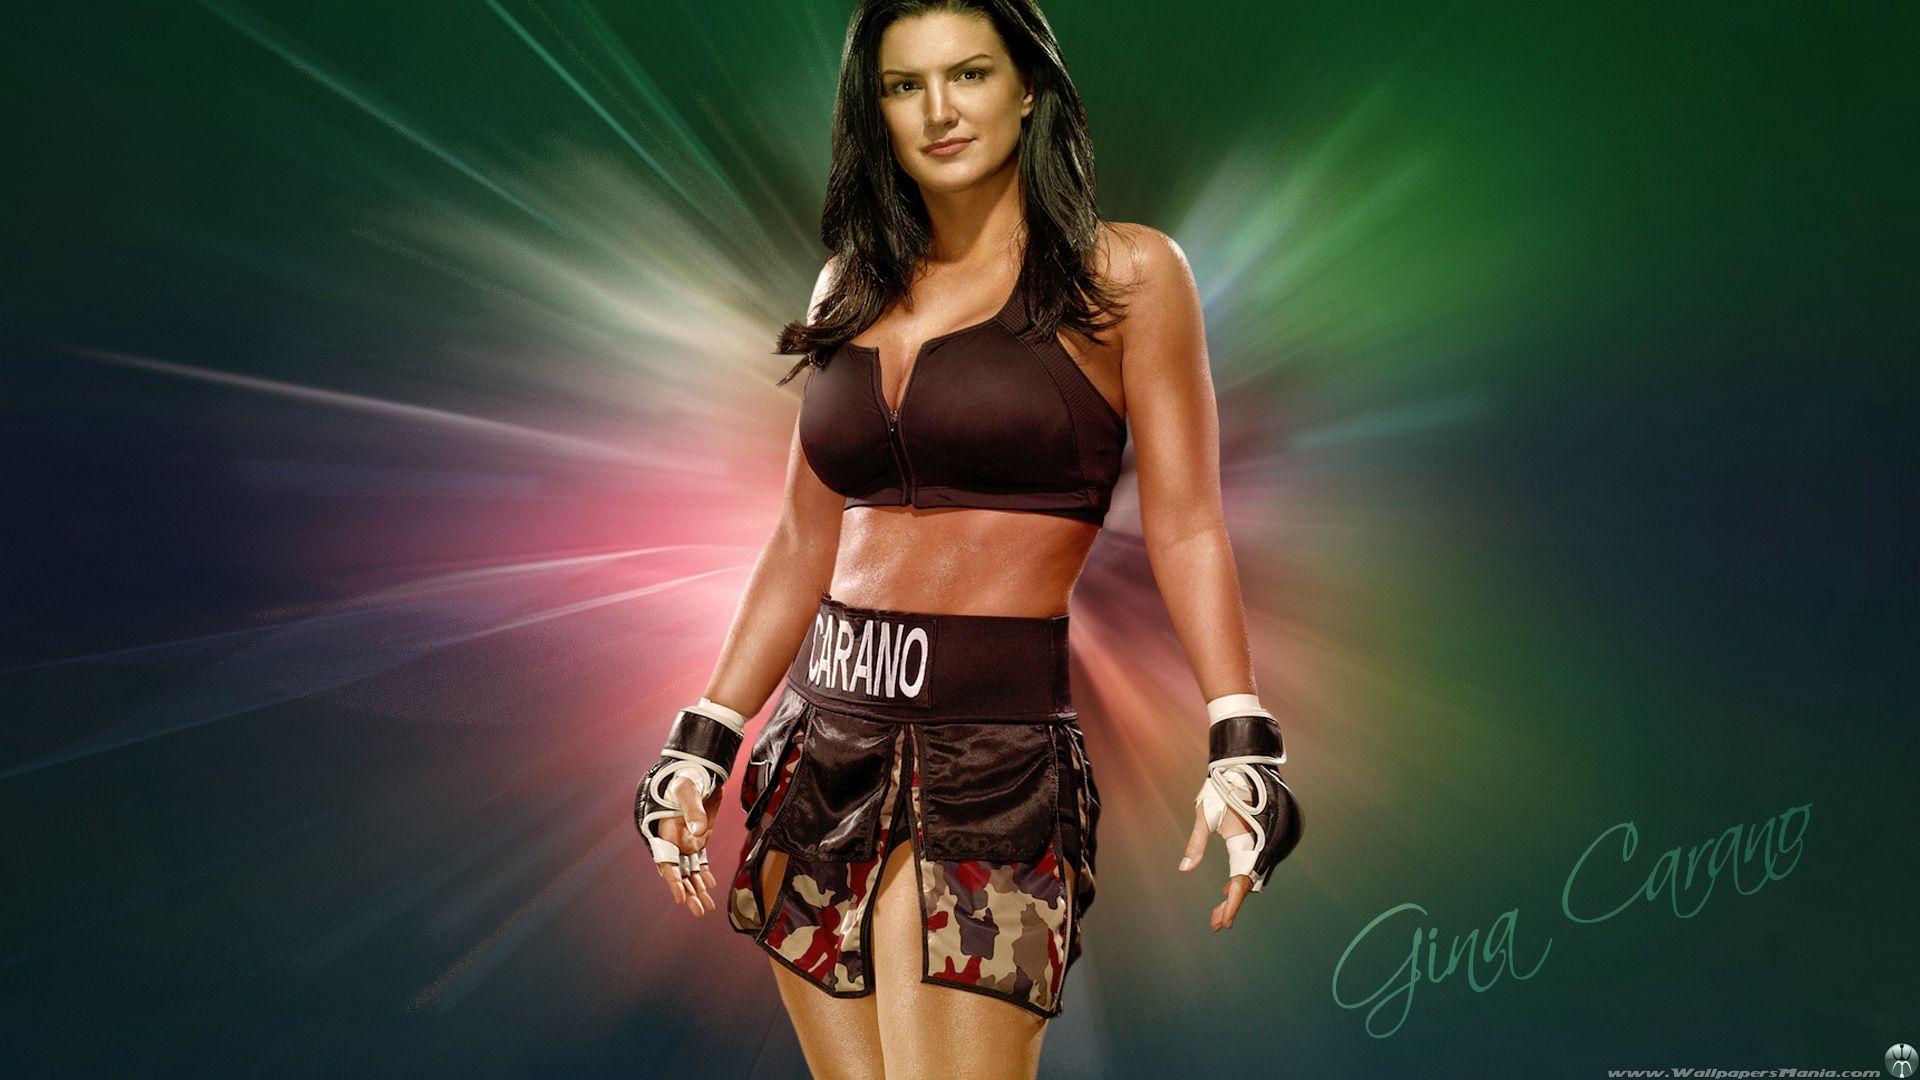 Gina Carano Wallpaper High Resolution and Quality Download